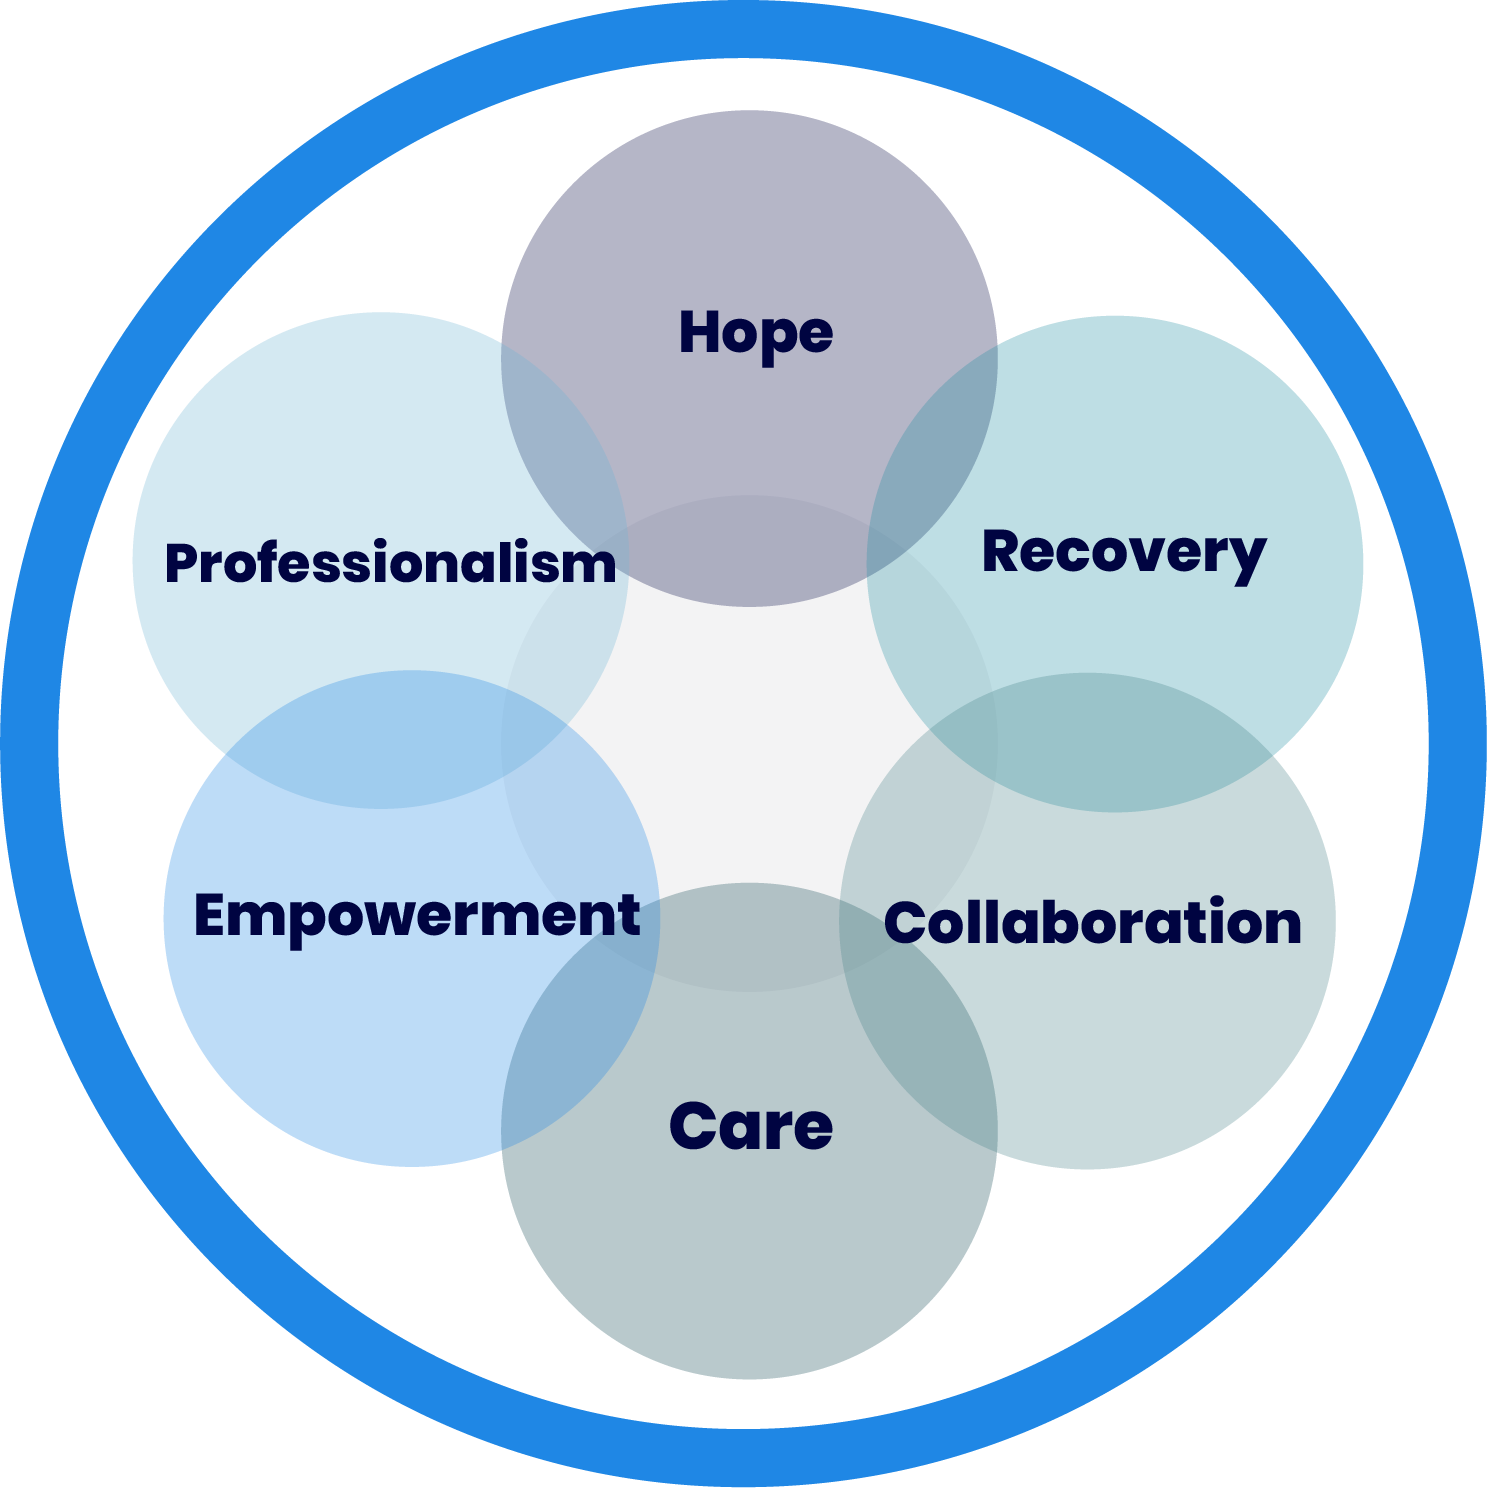 Values showing hope, recovery, professionalism, empowerment, collaboration and care